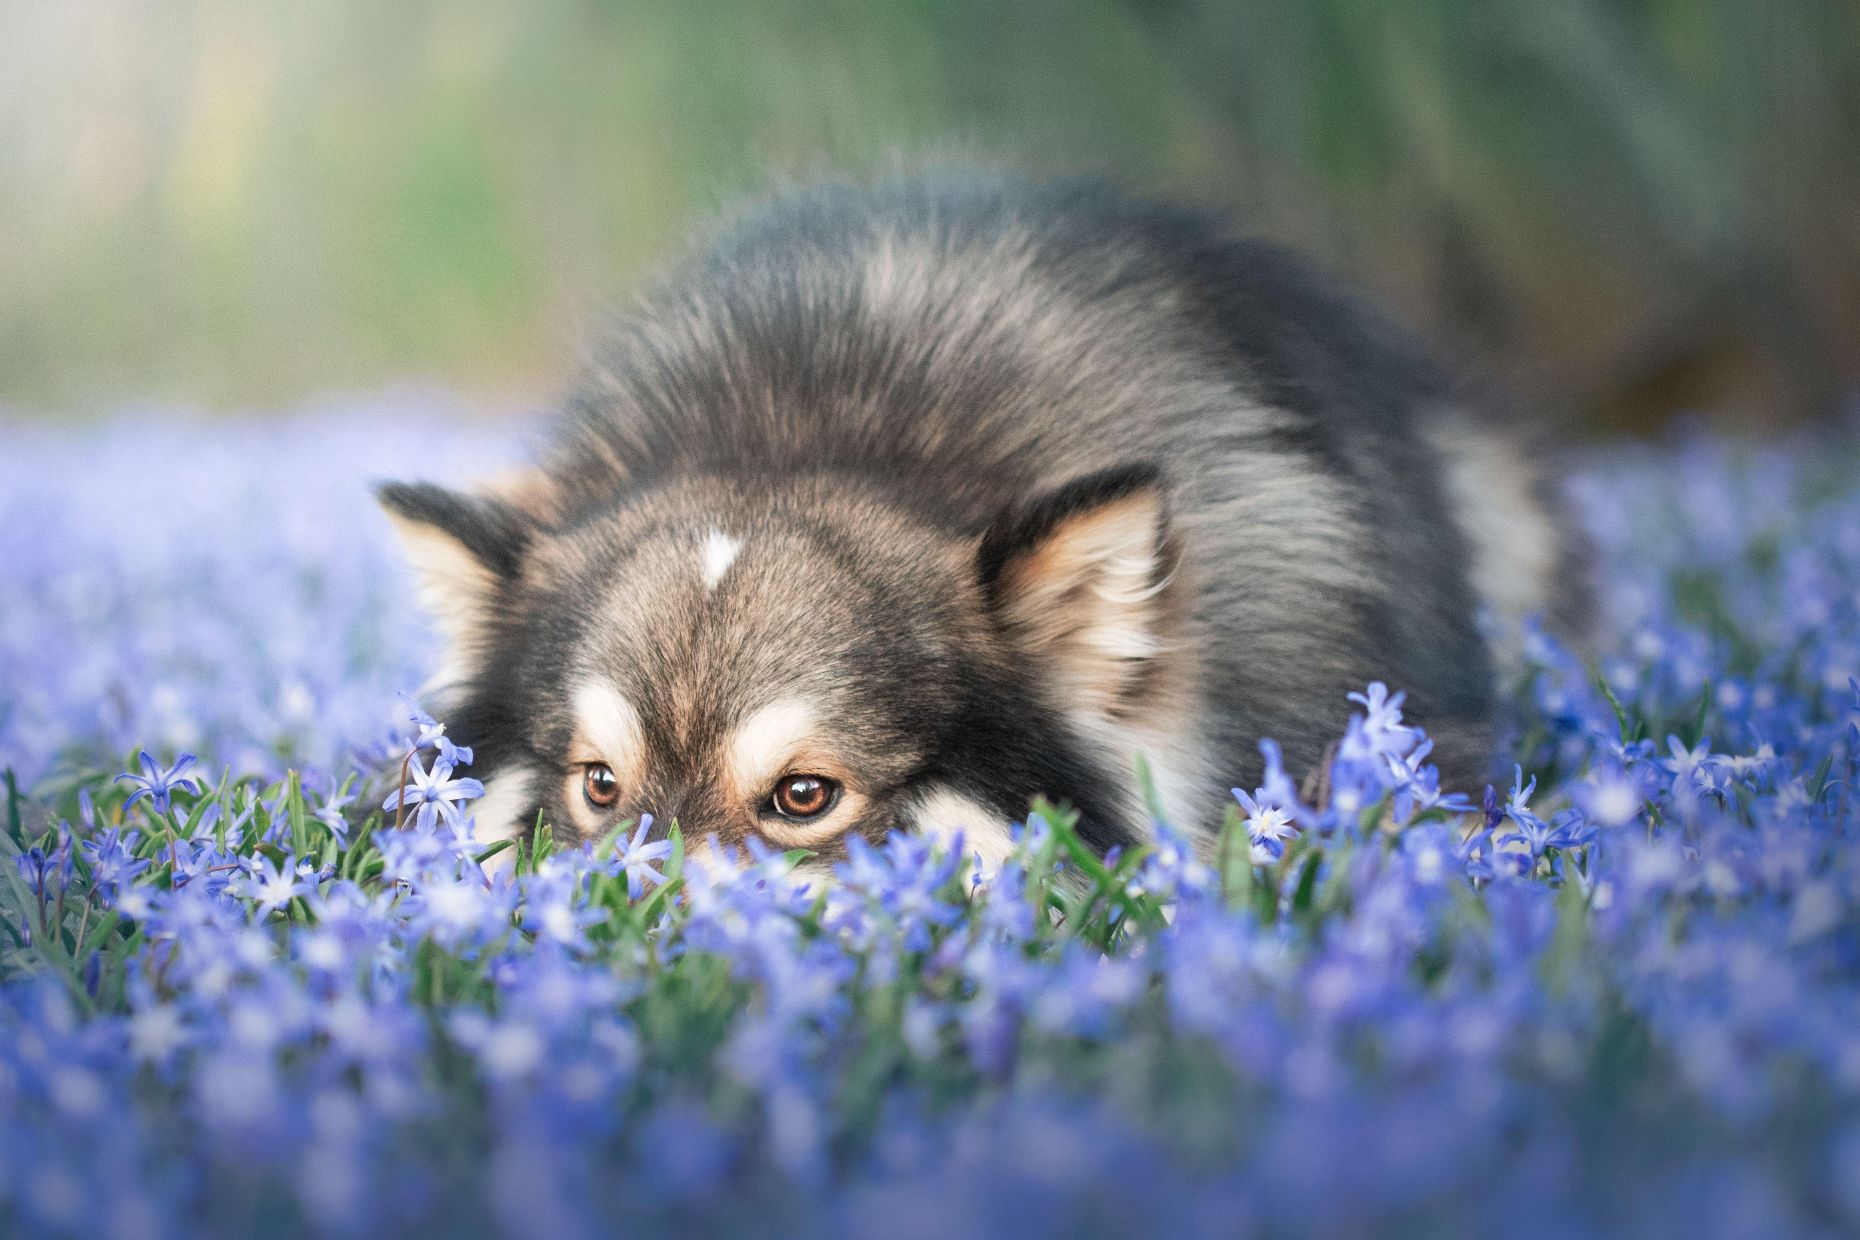 Portrait of a Finnish Lapphund dog outdoors among blue flowers in spring season - Image ID: 2JCPFYG